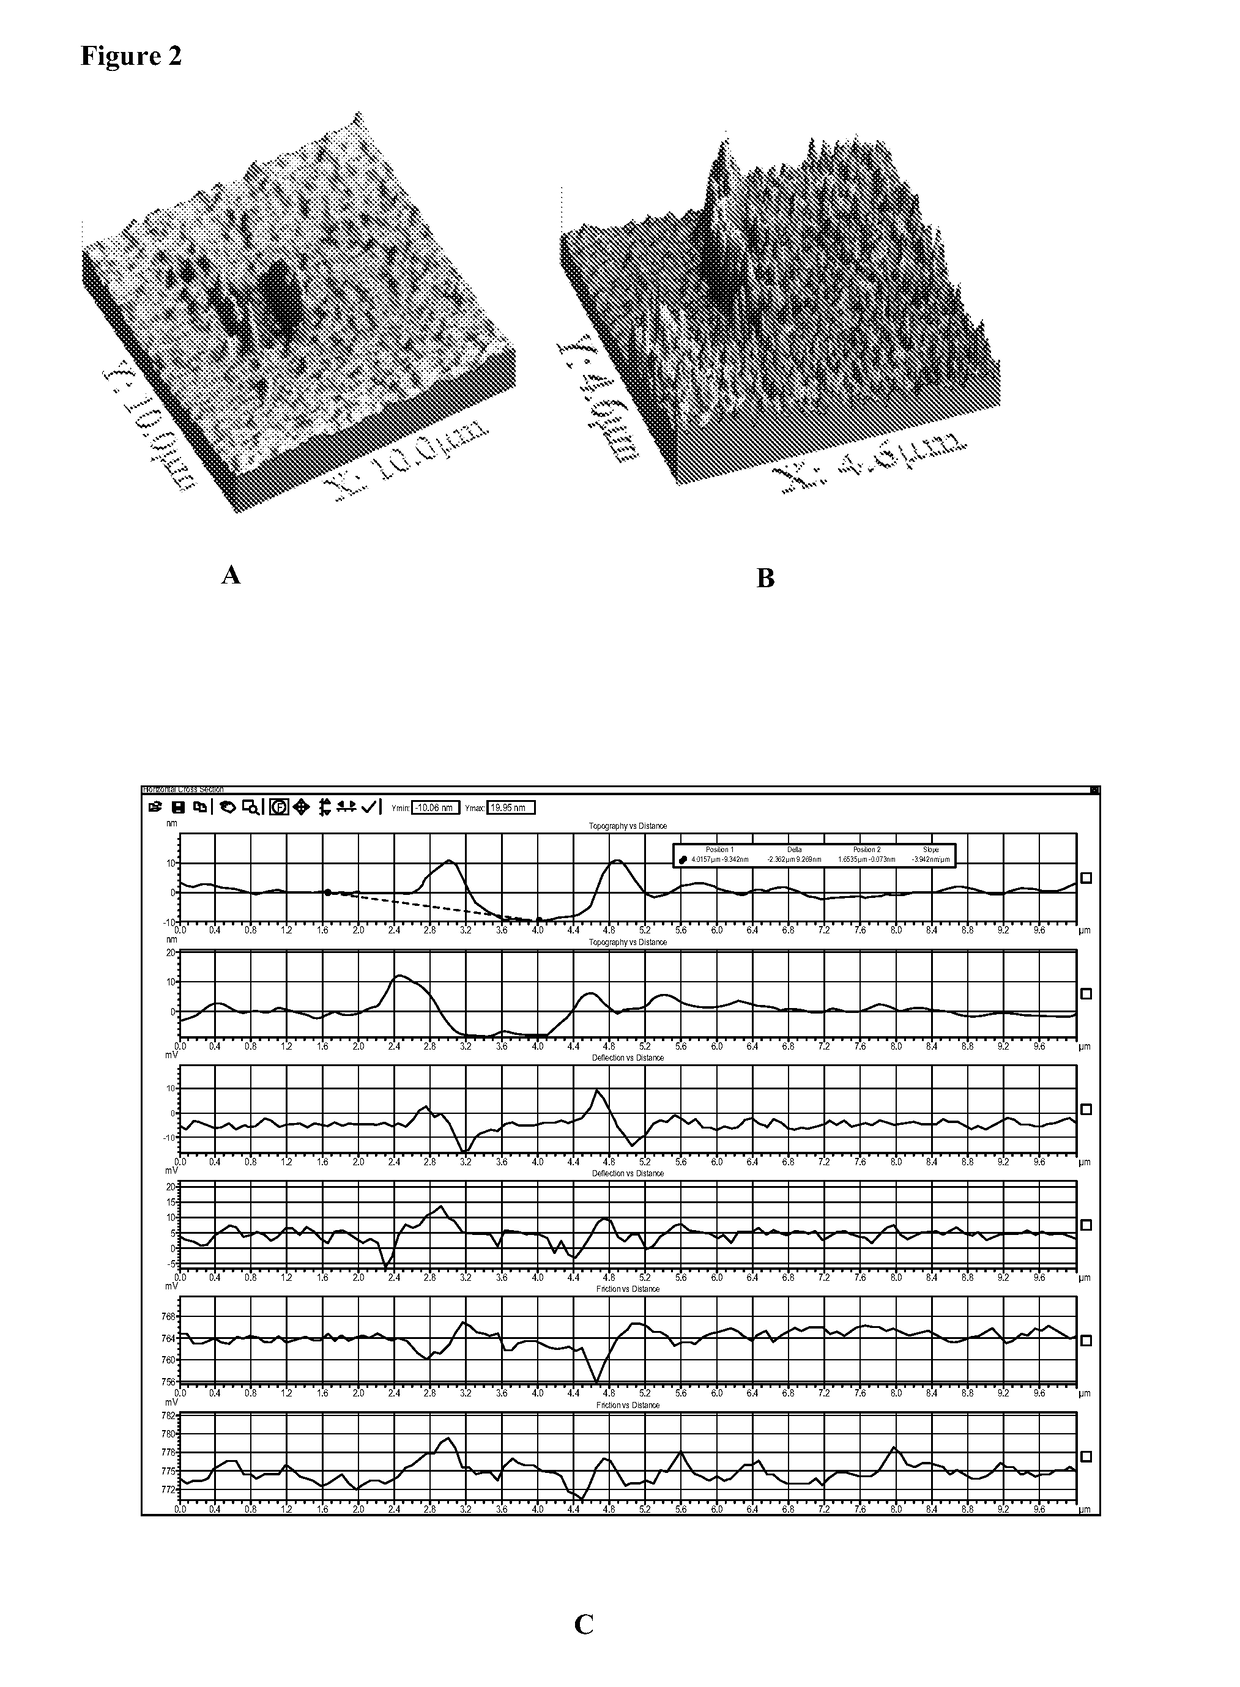 Biocoated piezoelectric biosensor platform for point-of-care diagnostic use